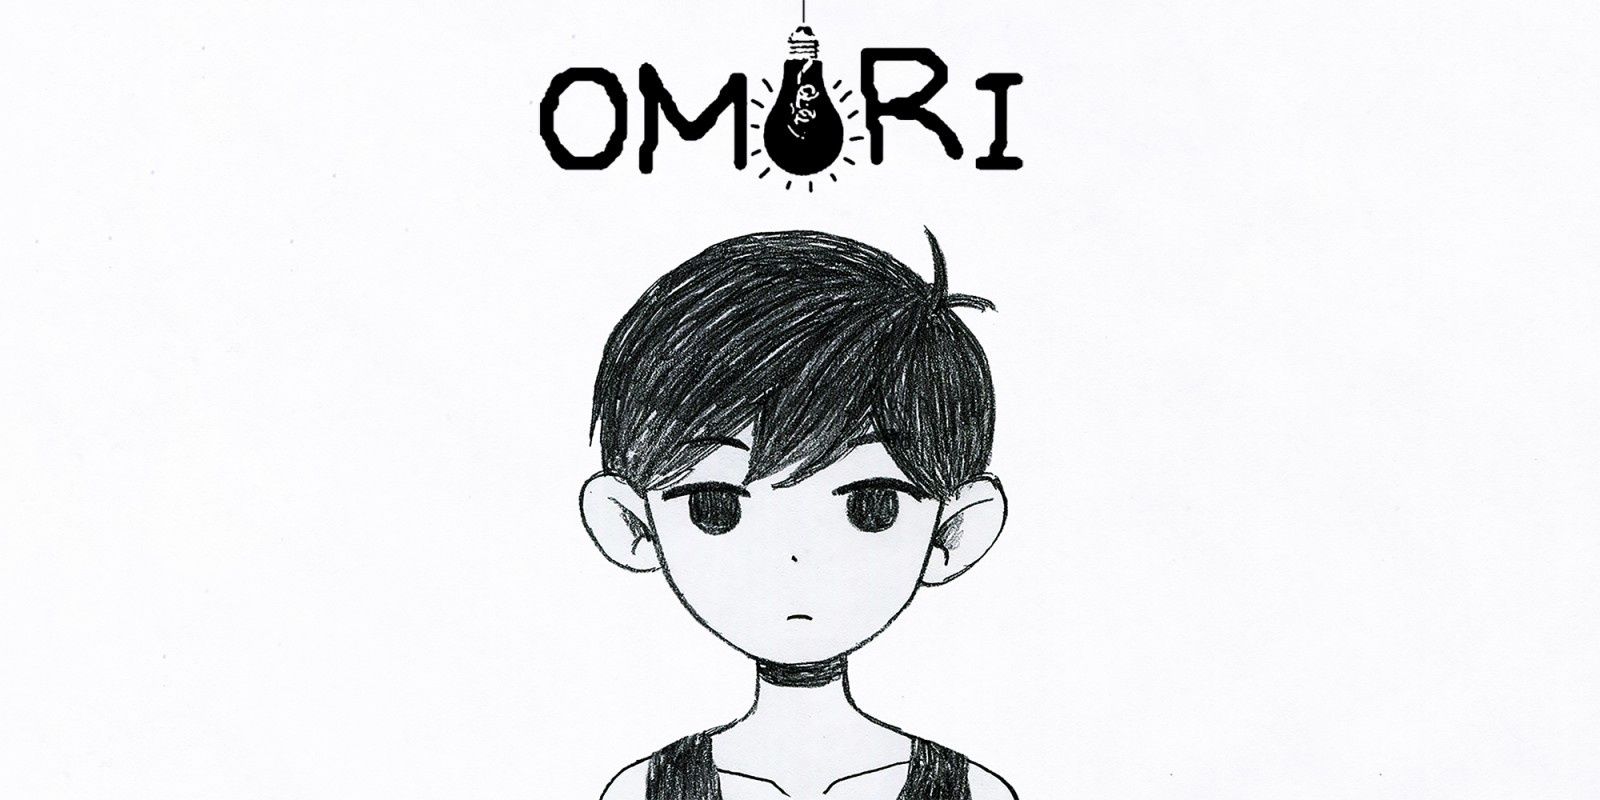 A black and white image of Omori with the game's title